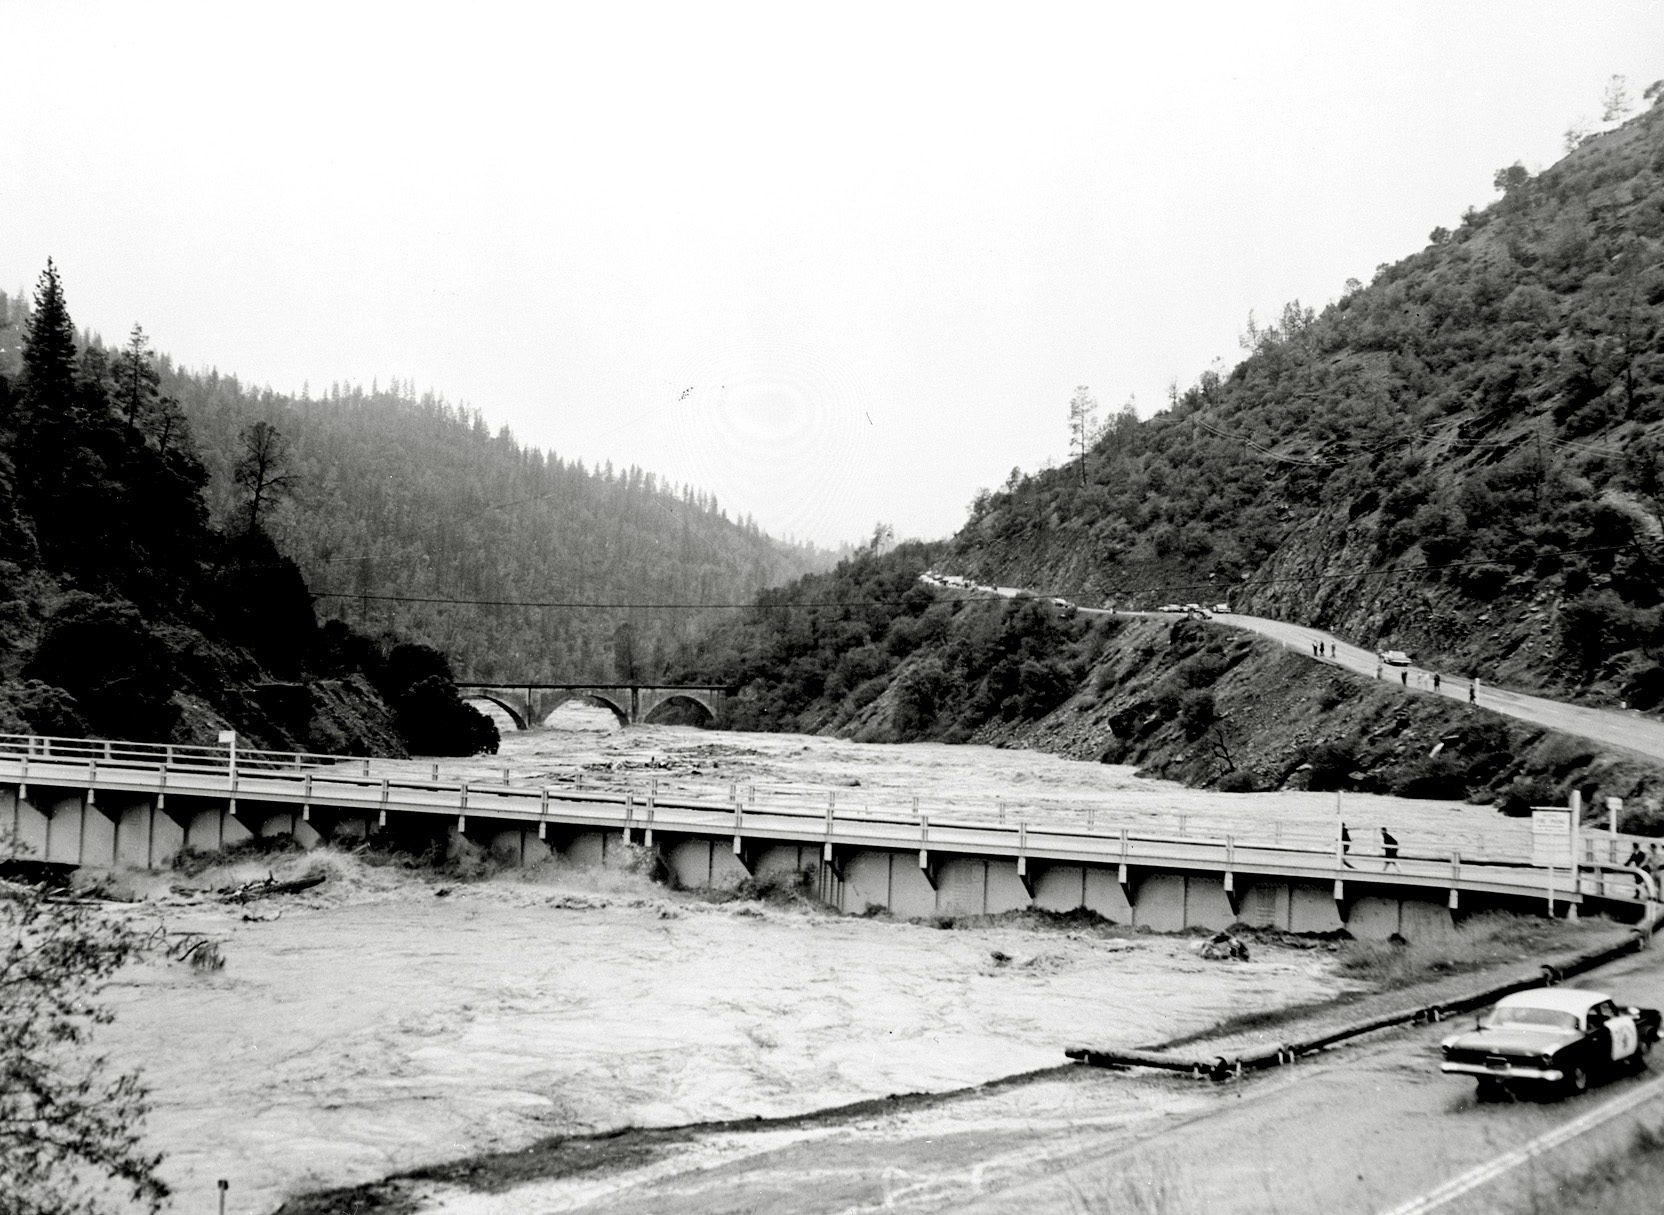 Record rainfall in the Sierra Nevada mountains in December 1964 caused water to breach the yet uncompleted Hell Hole Reservoir Dam located 40 miles east of the City of Auburn, Placer County, California. As the water surge arrived at the Highway 49 Bridge between Auburn and Cool, the Highway 49 bridge was completely destroyed, while the older concrete railroad crossing in the background survives to this day. Norm Sayler Collection, Donner Summit Historical Society. View full size.